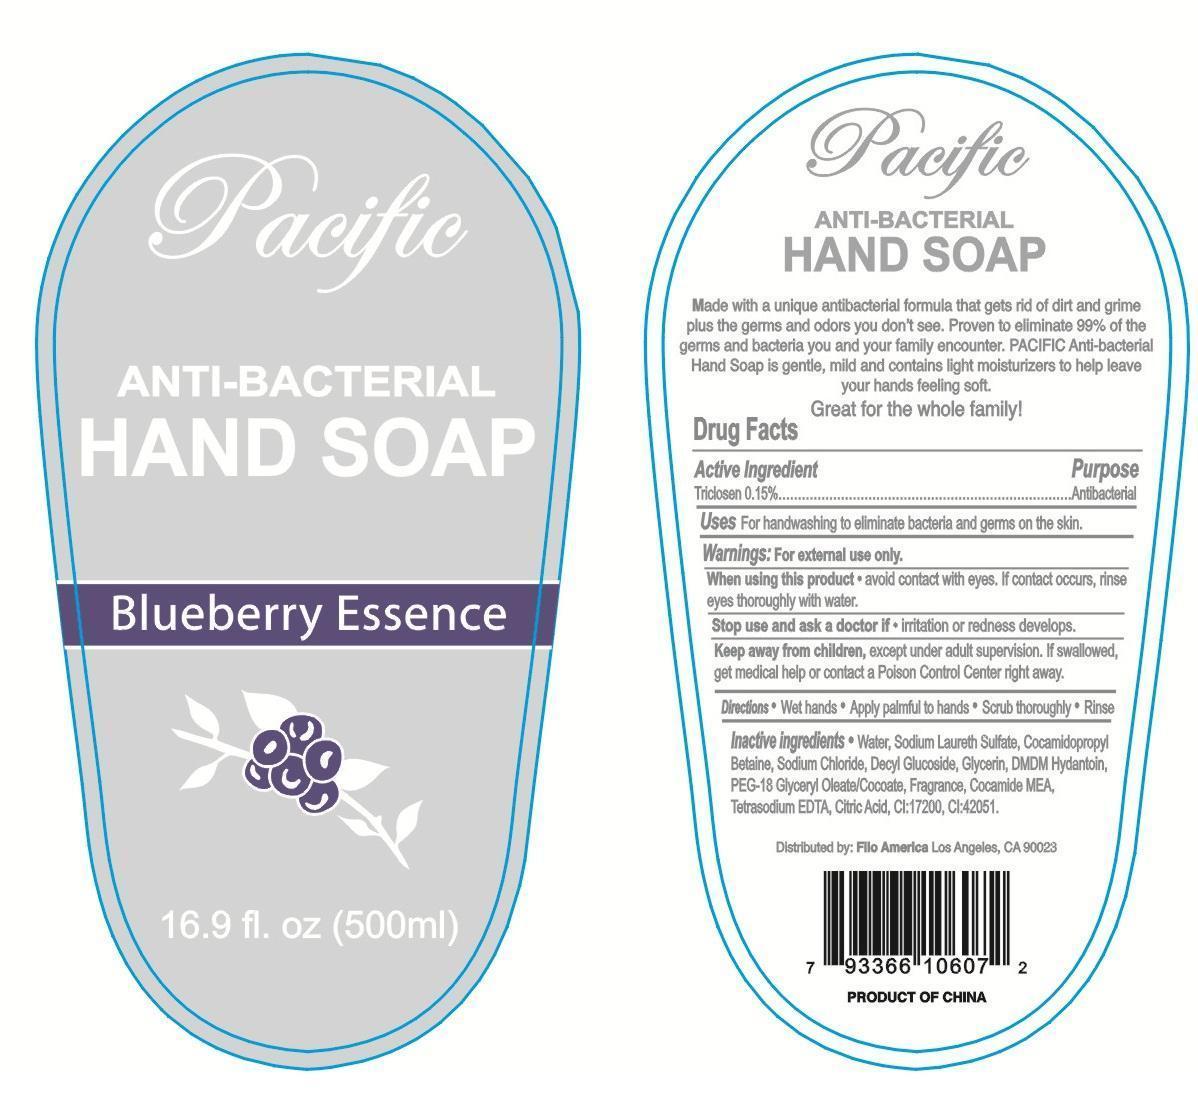 Pacific Anti-bacterial Hand Cleanse Blueberry Essence | Triclosan Gel Breastfeeding